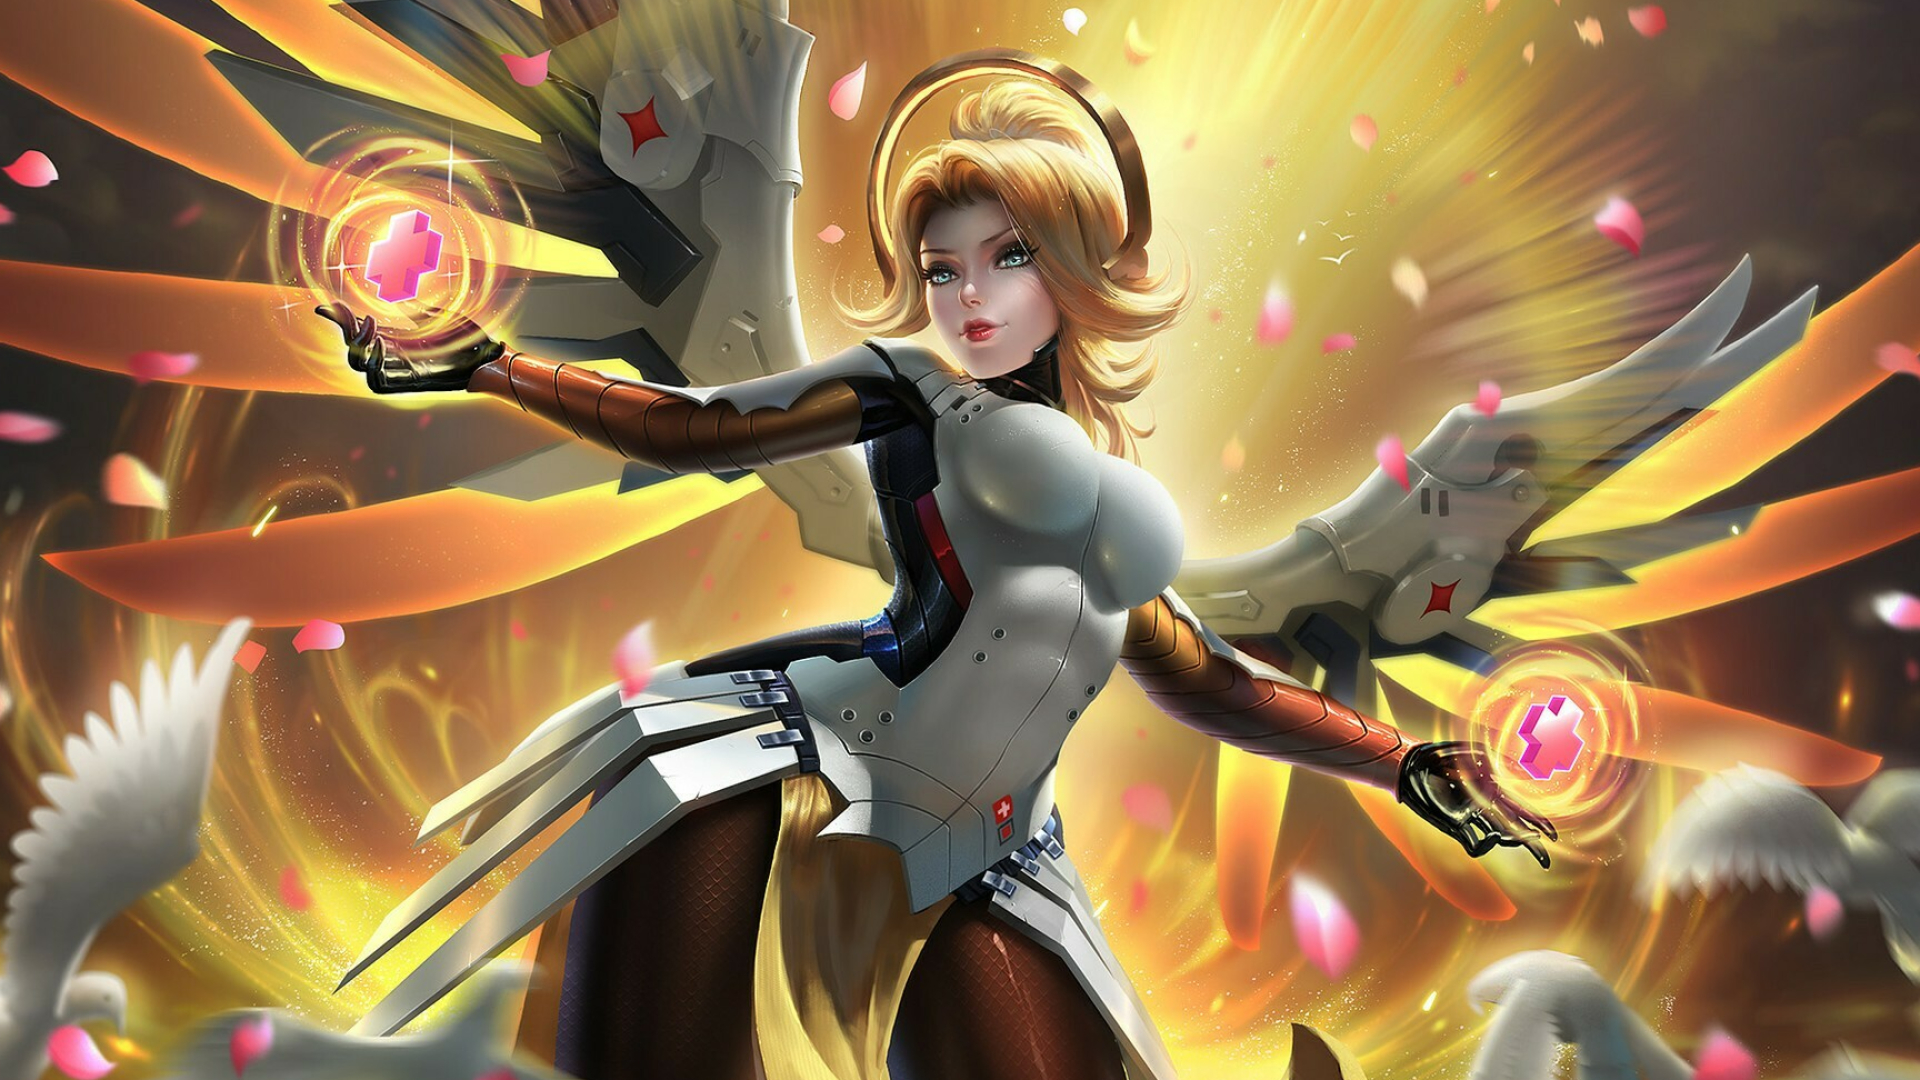 Overwatch: Mercy, Wears a winged Valkyrie suit, Guardian Angel. 1920x1080 Full HD Wallpaper.